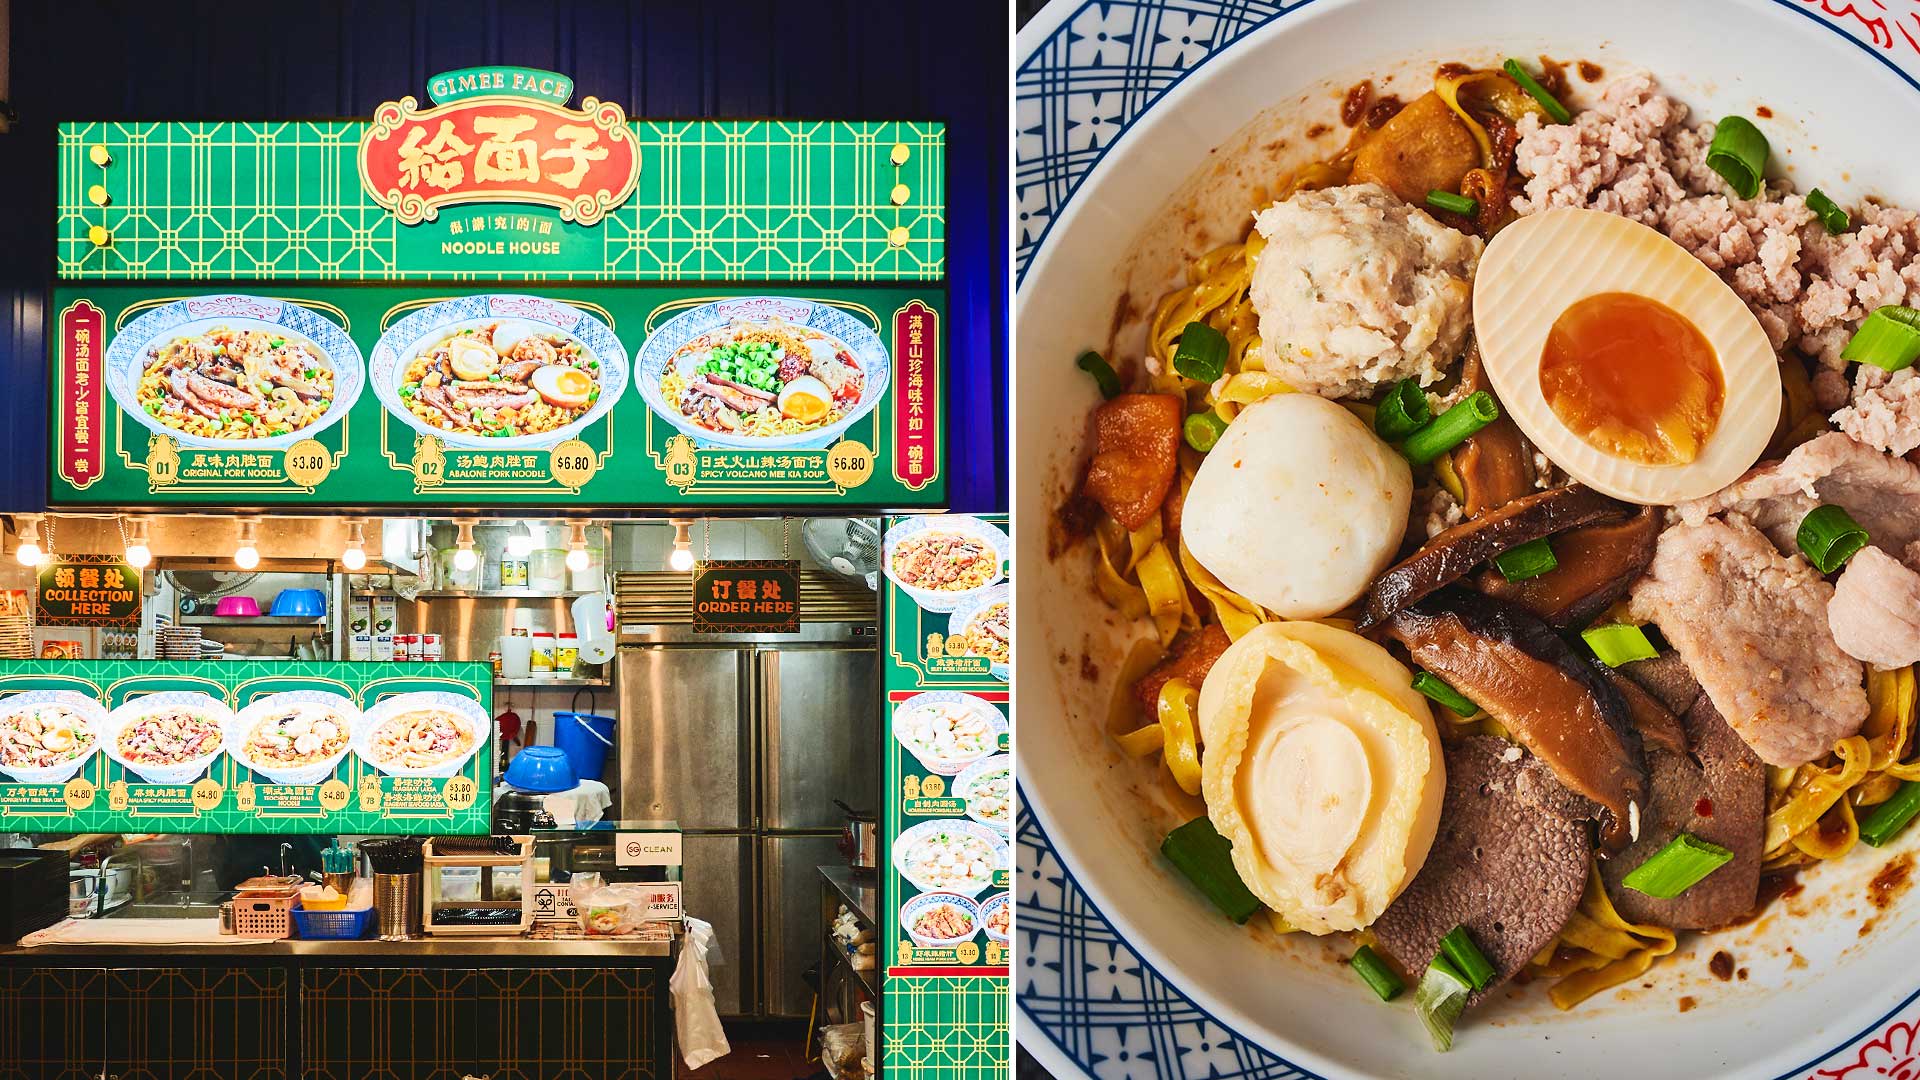 New Hawker Stall Gimee Face Sells $6.80 Abalone Bak Chor Mee